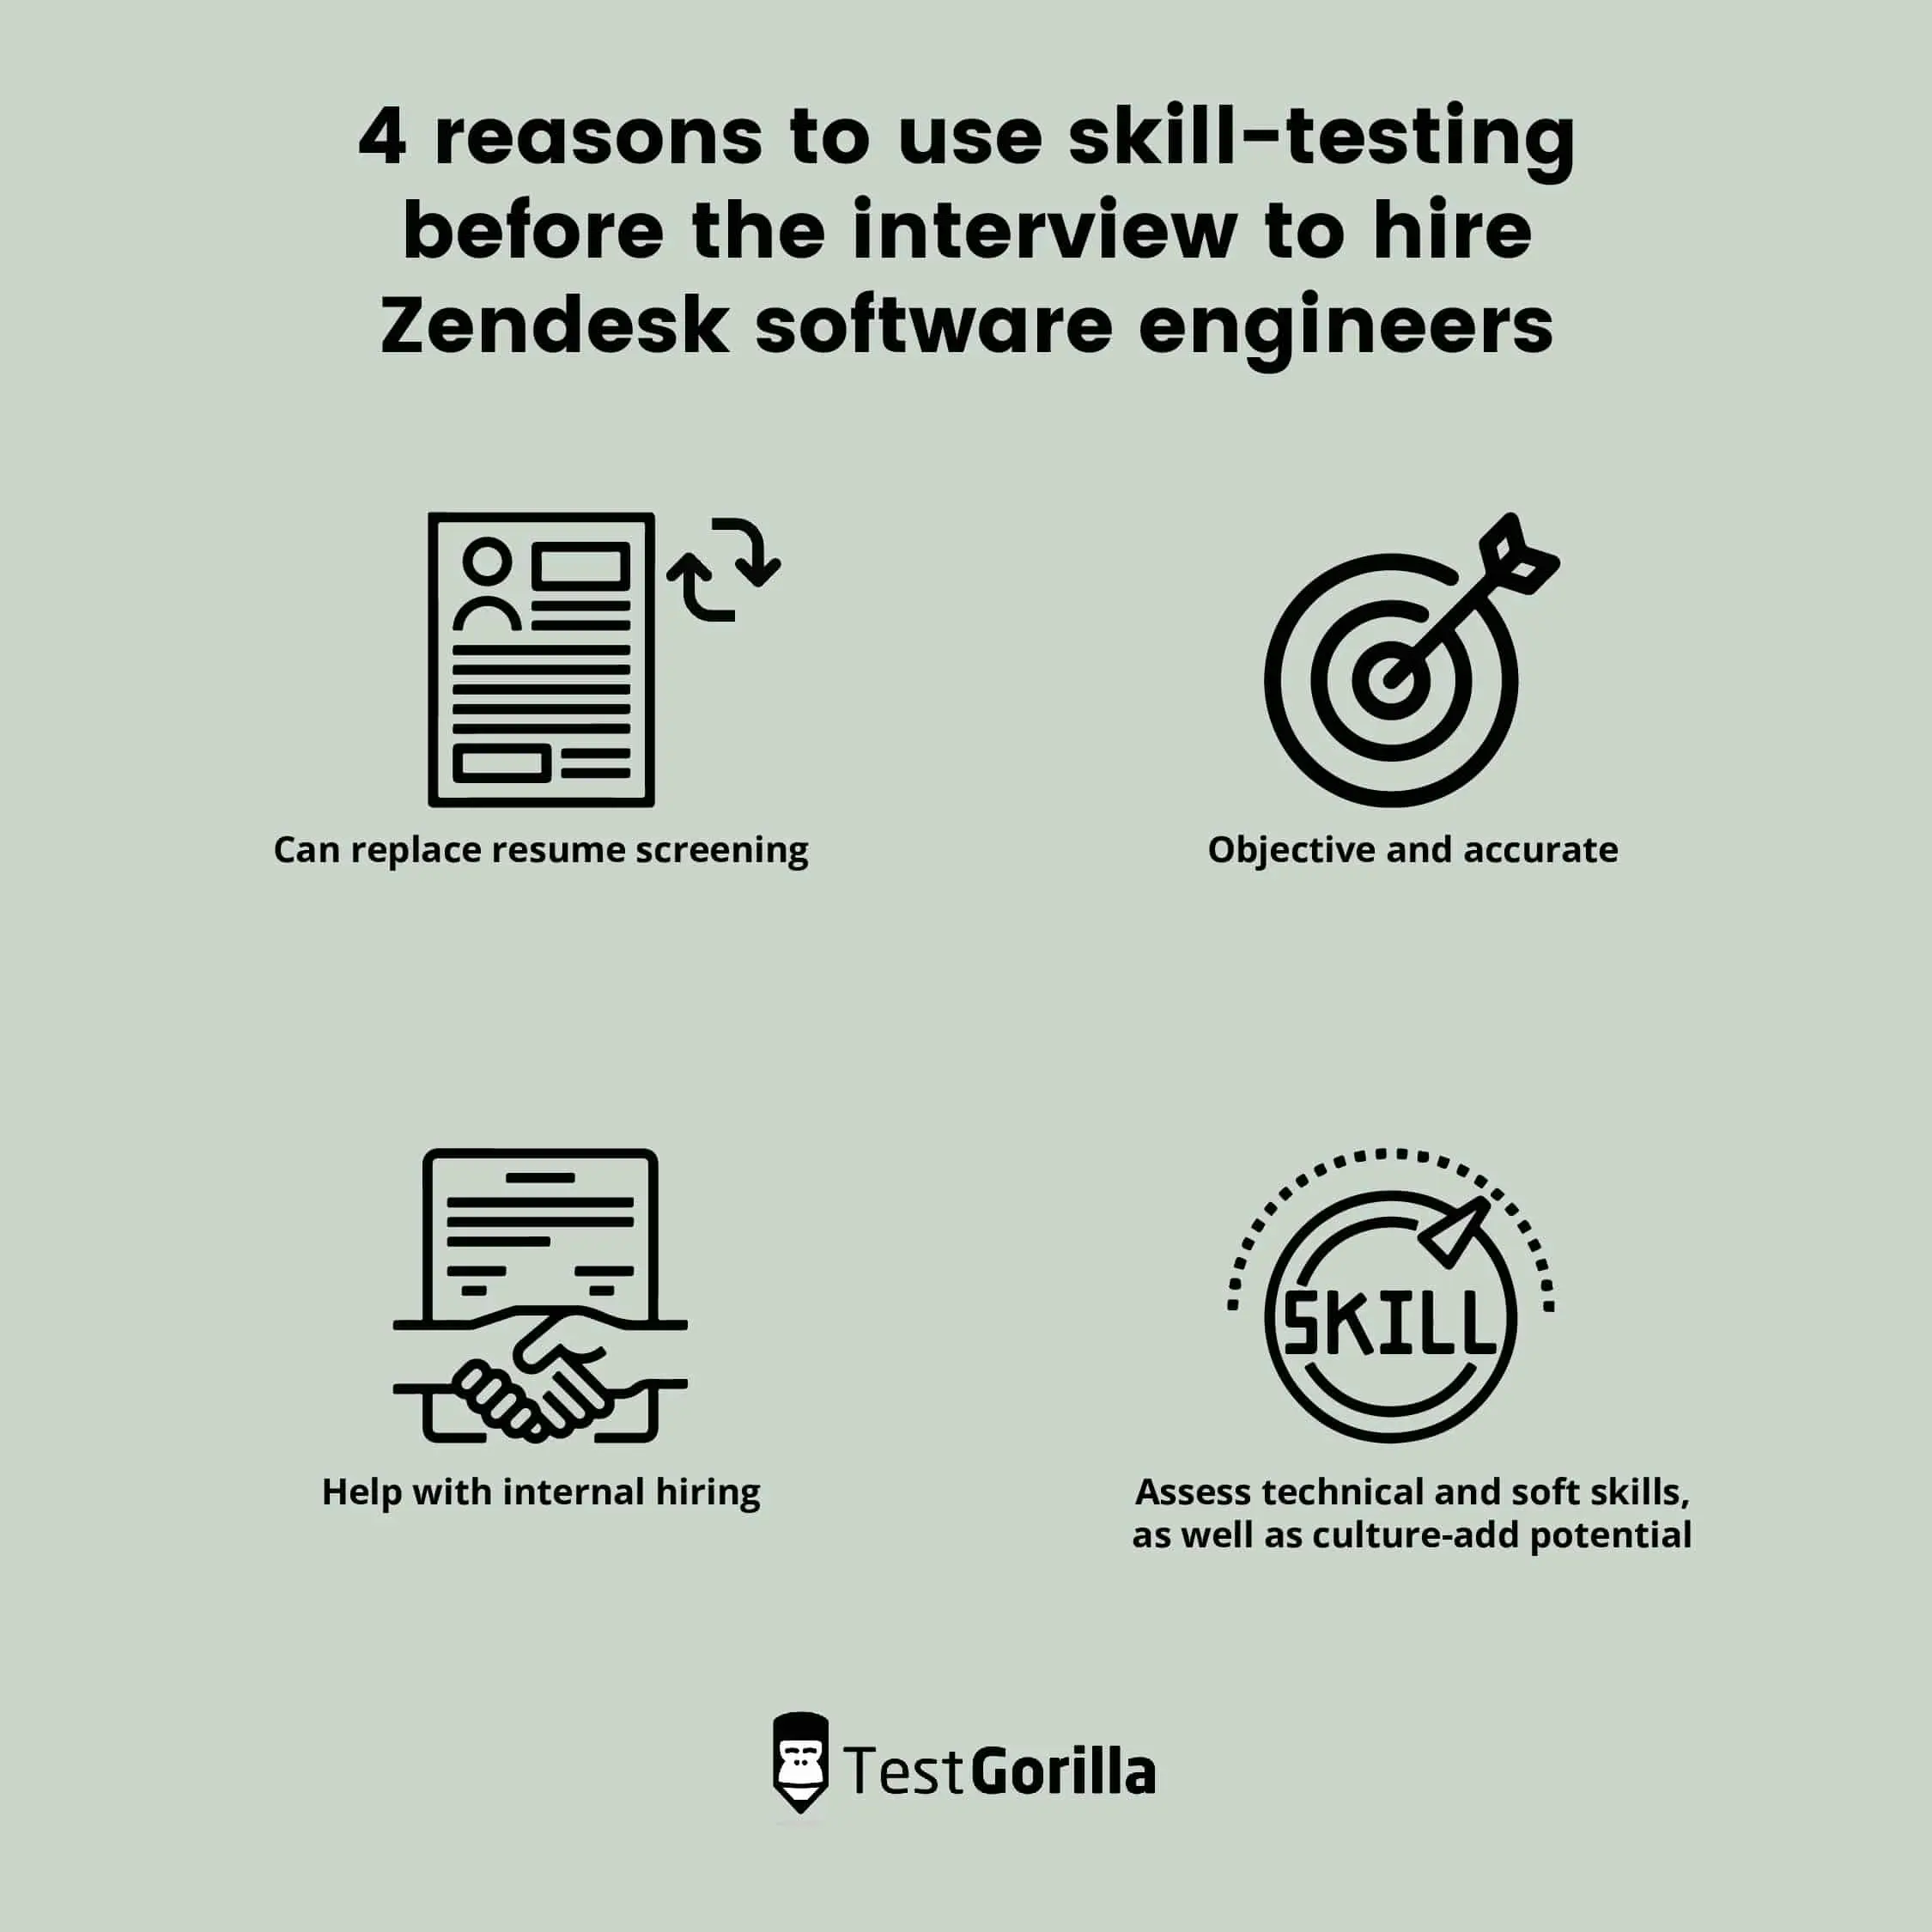 4 reasons to use skill-testing before the interview to hire Zendesk software engineers